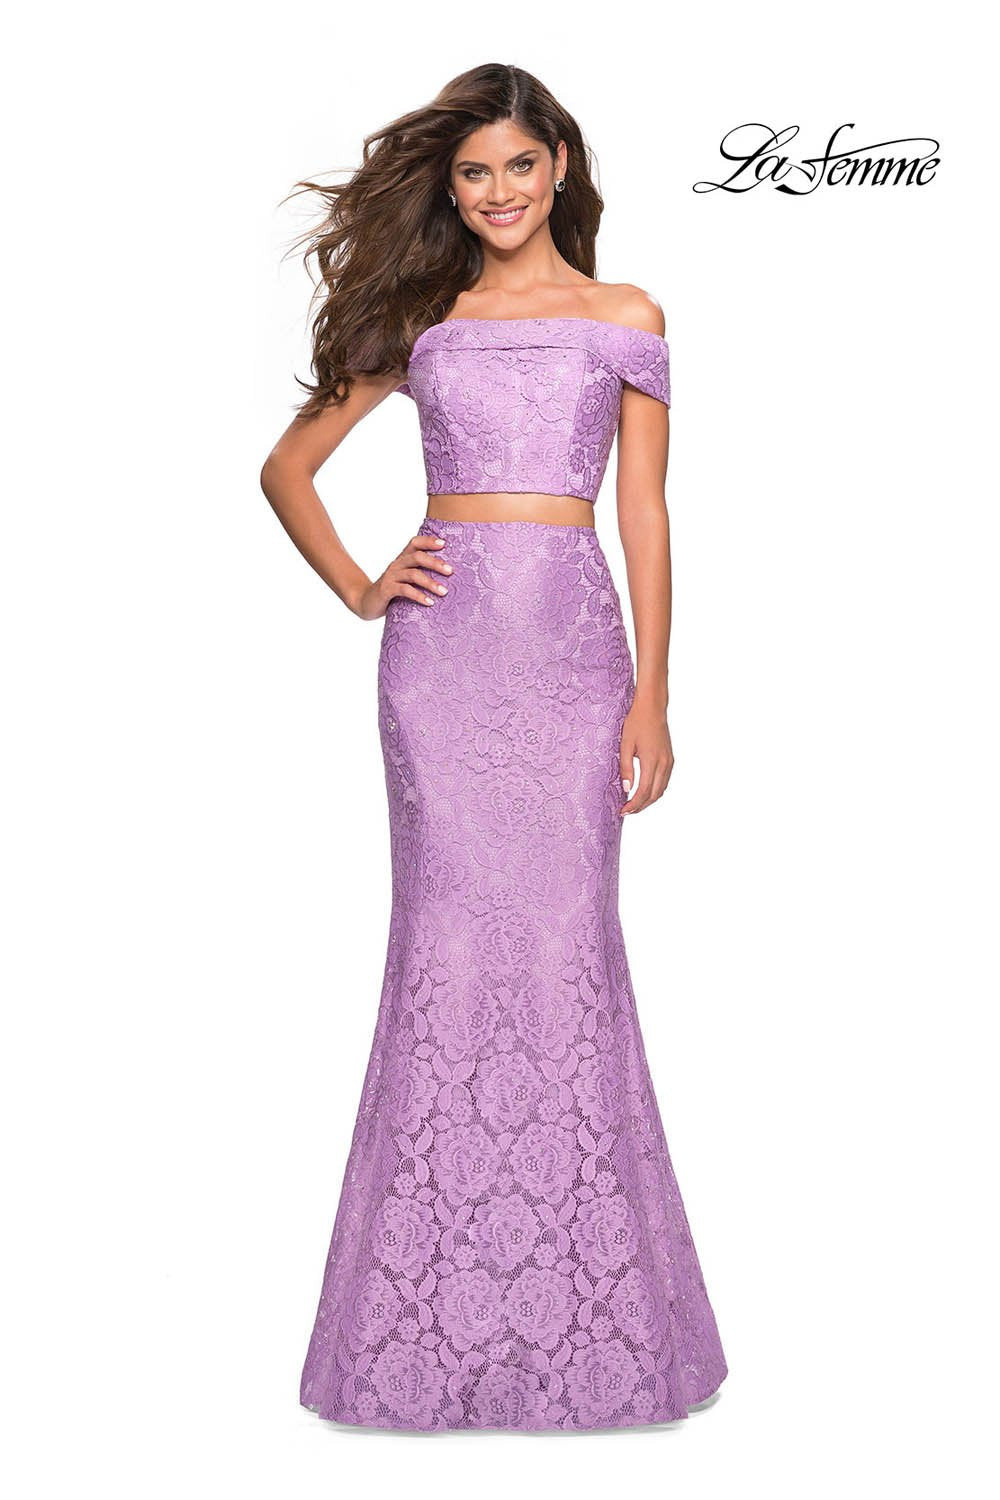 La Femme 27443 dress images in these colors: Electric Blue, Hot Fuchsia, Lavender, Red, White, Yellow.